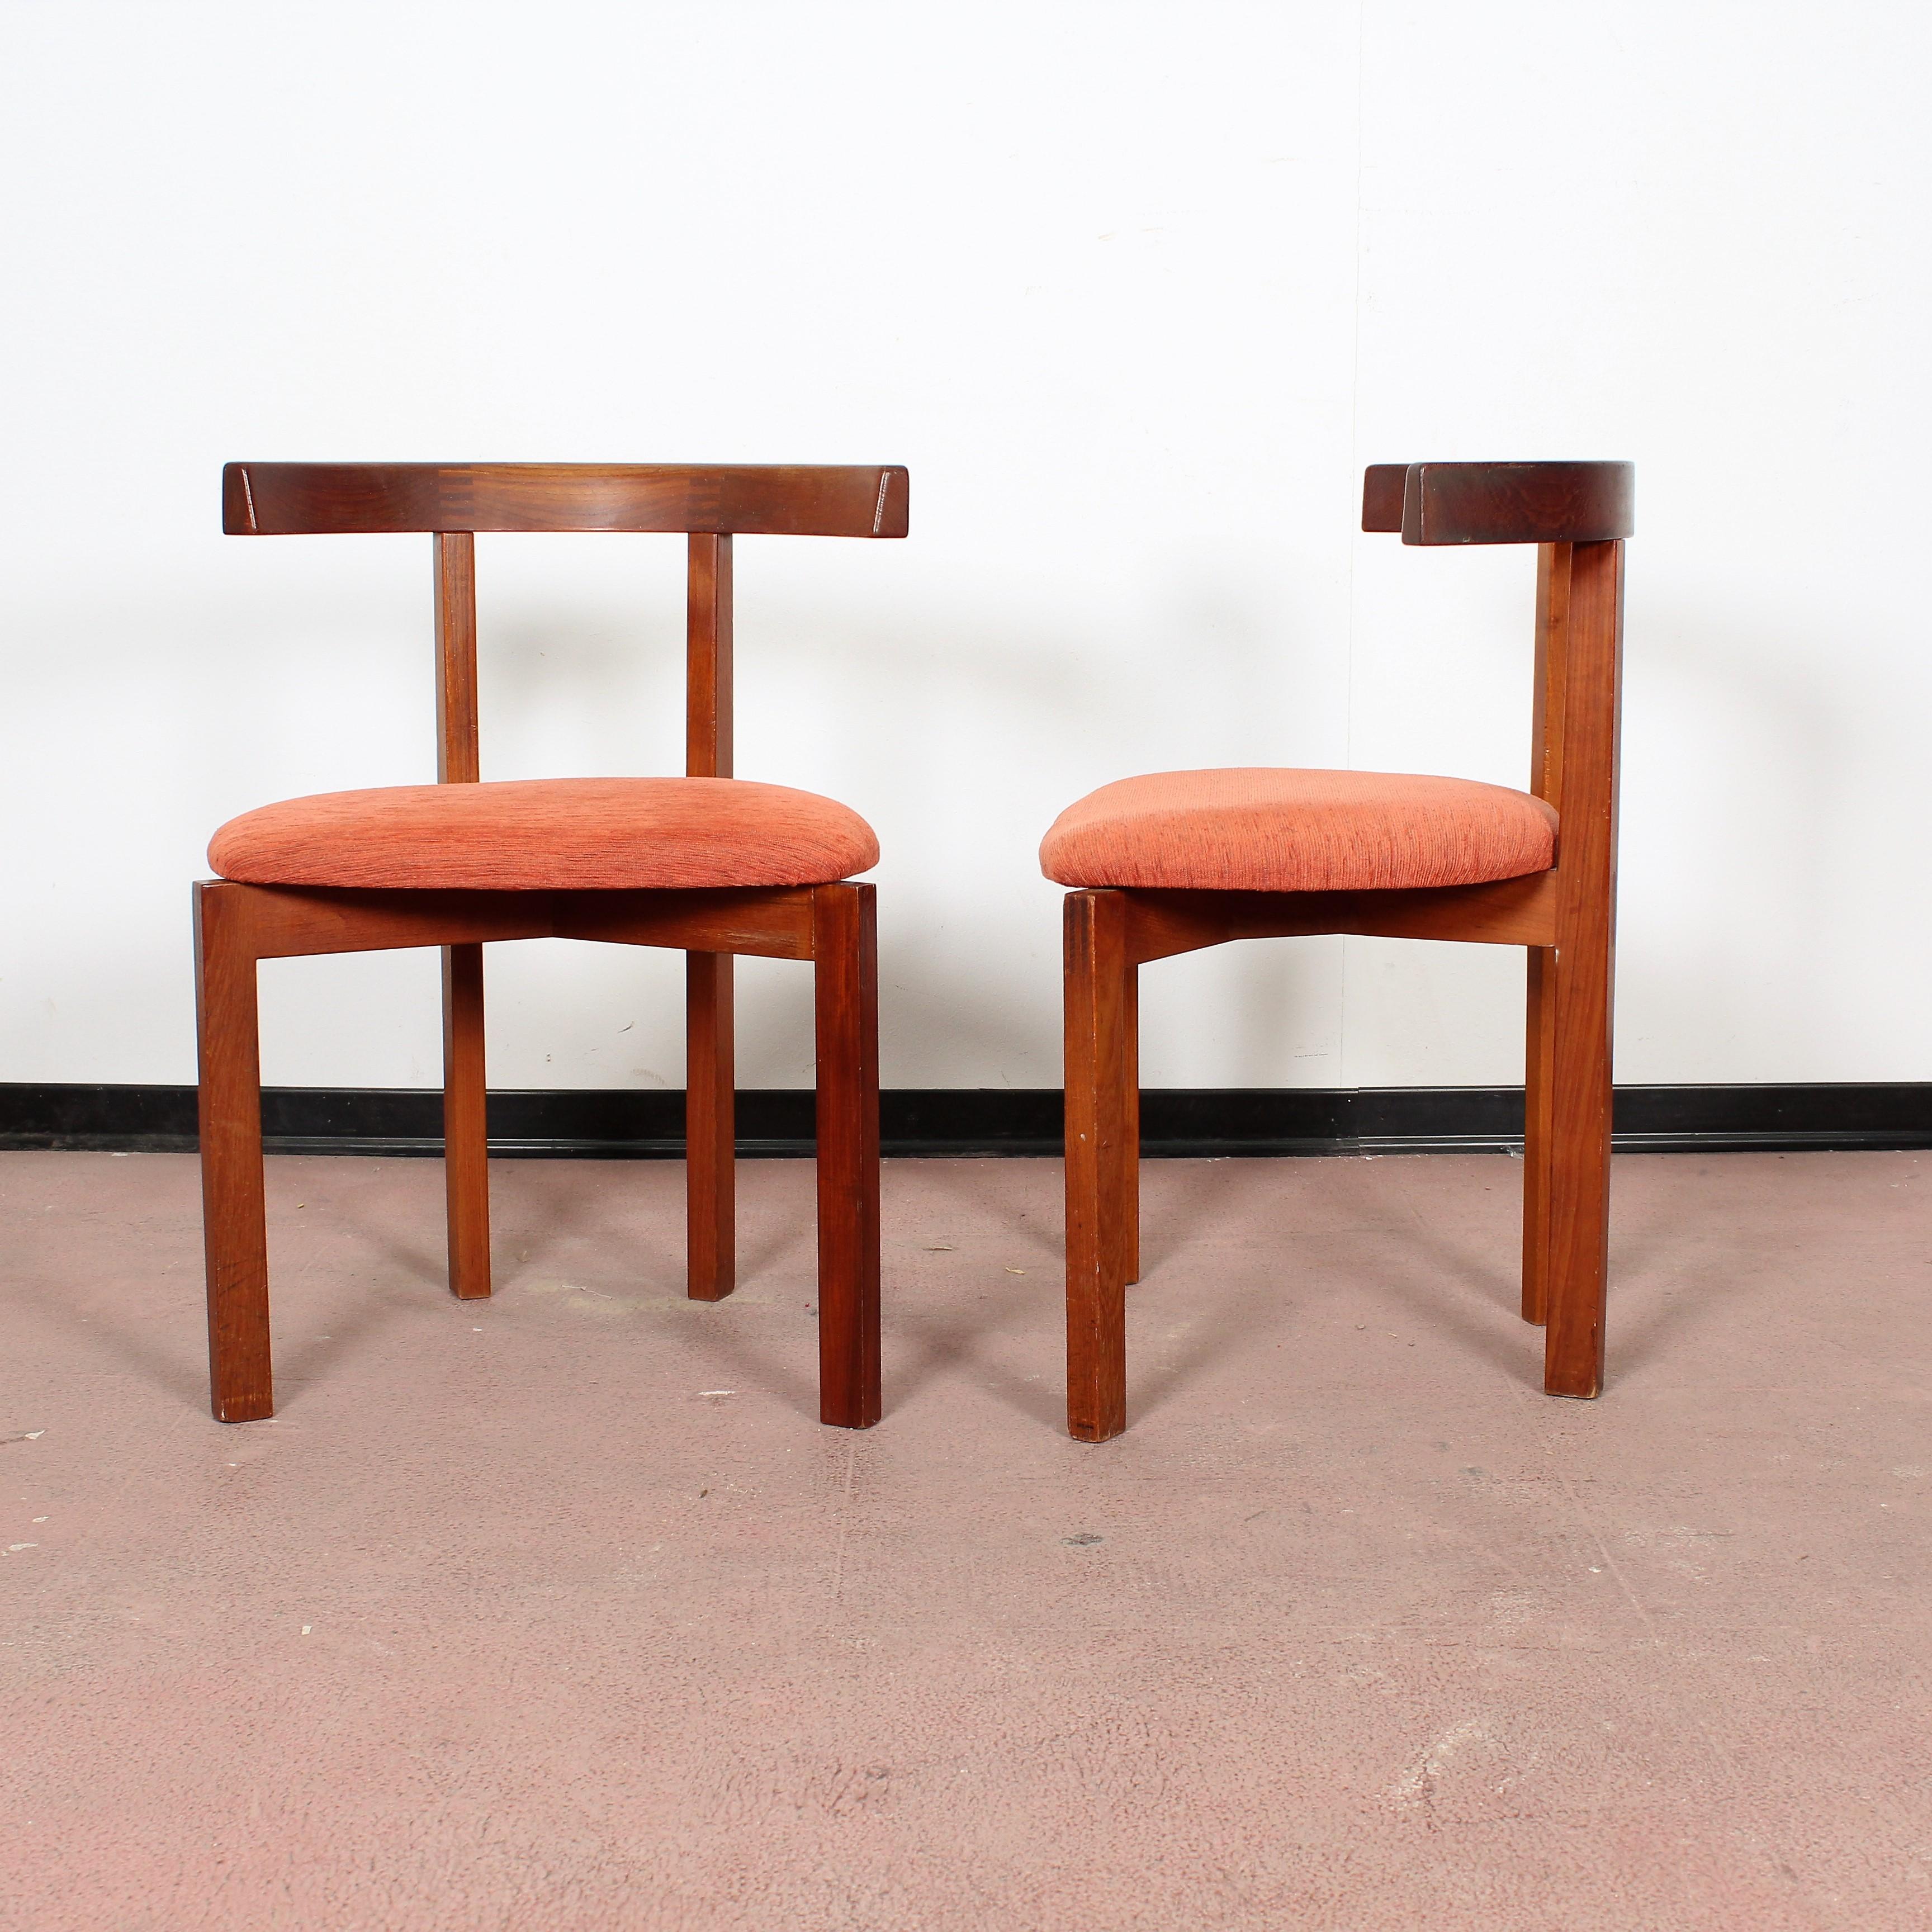 Mid-20th Century  Midcentury Teak Wooden Chairs FF Caffrance 1960 Set of 4